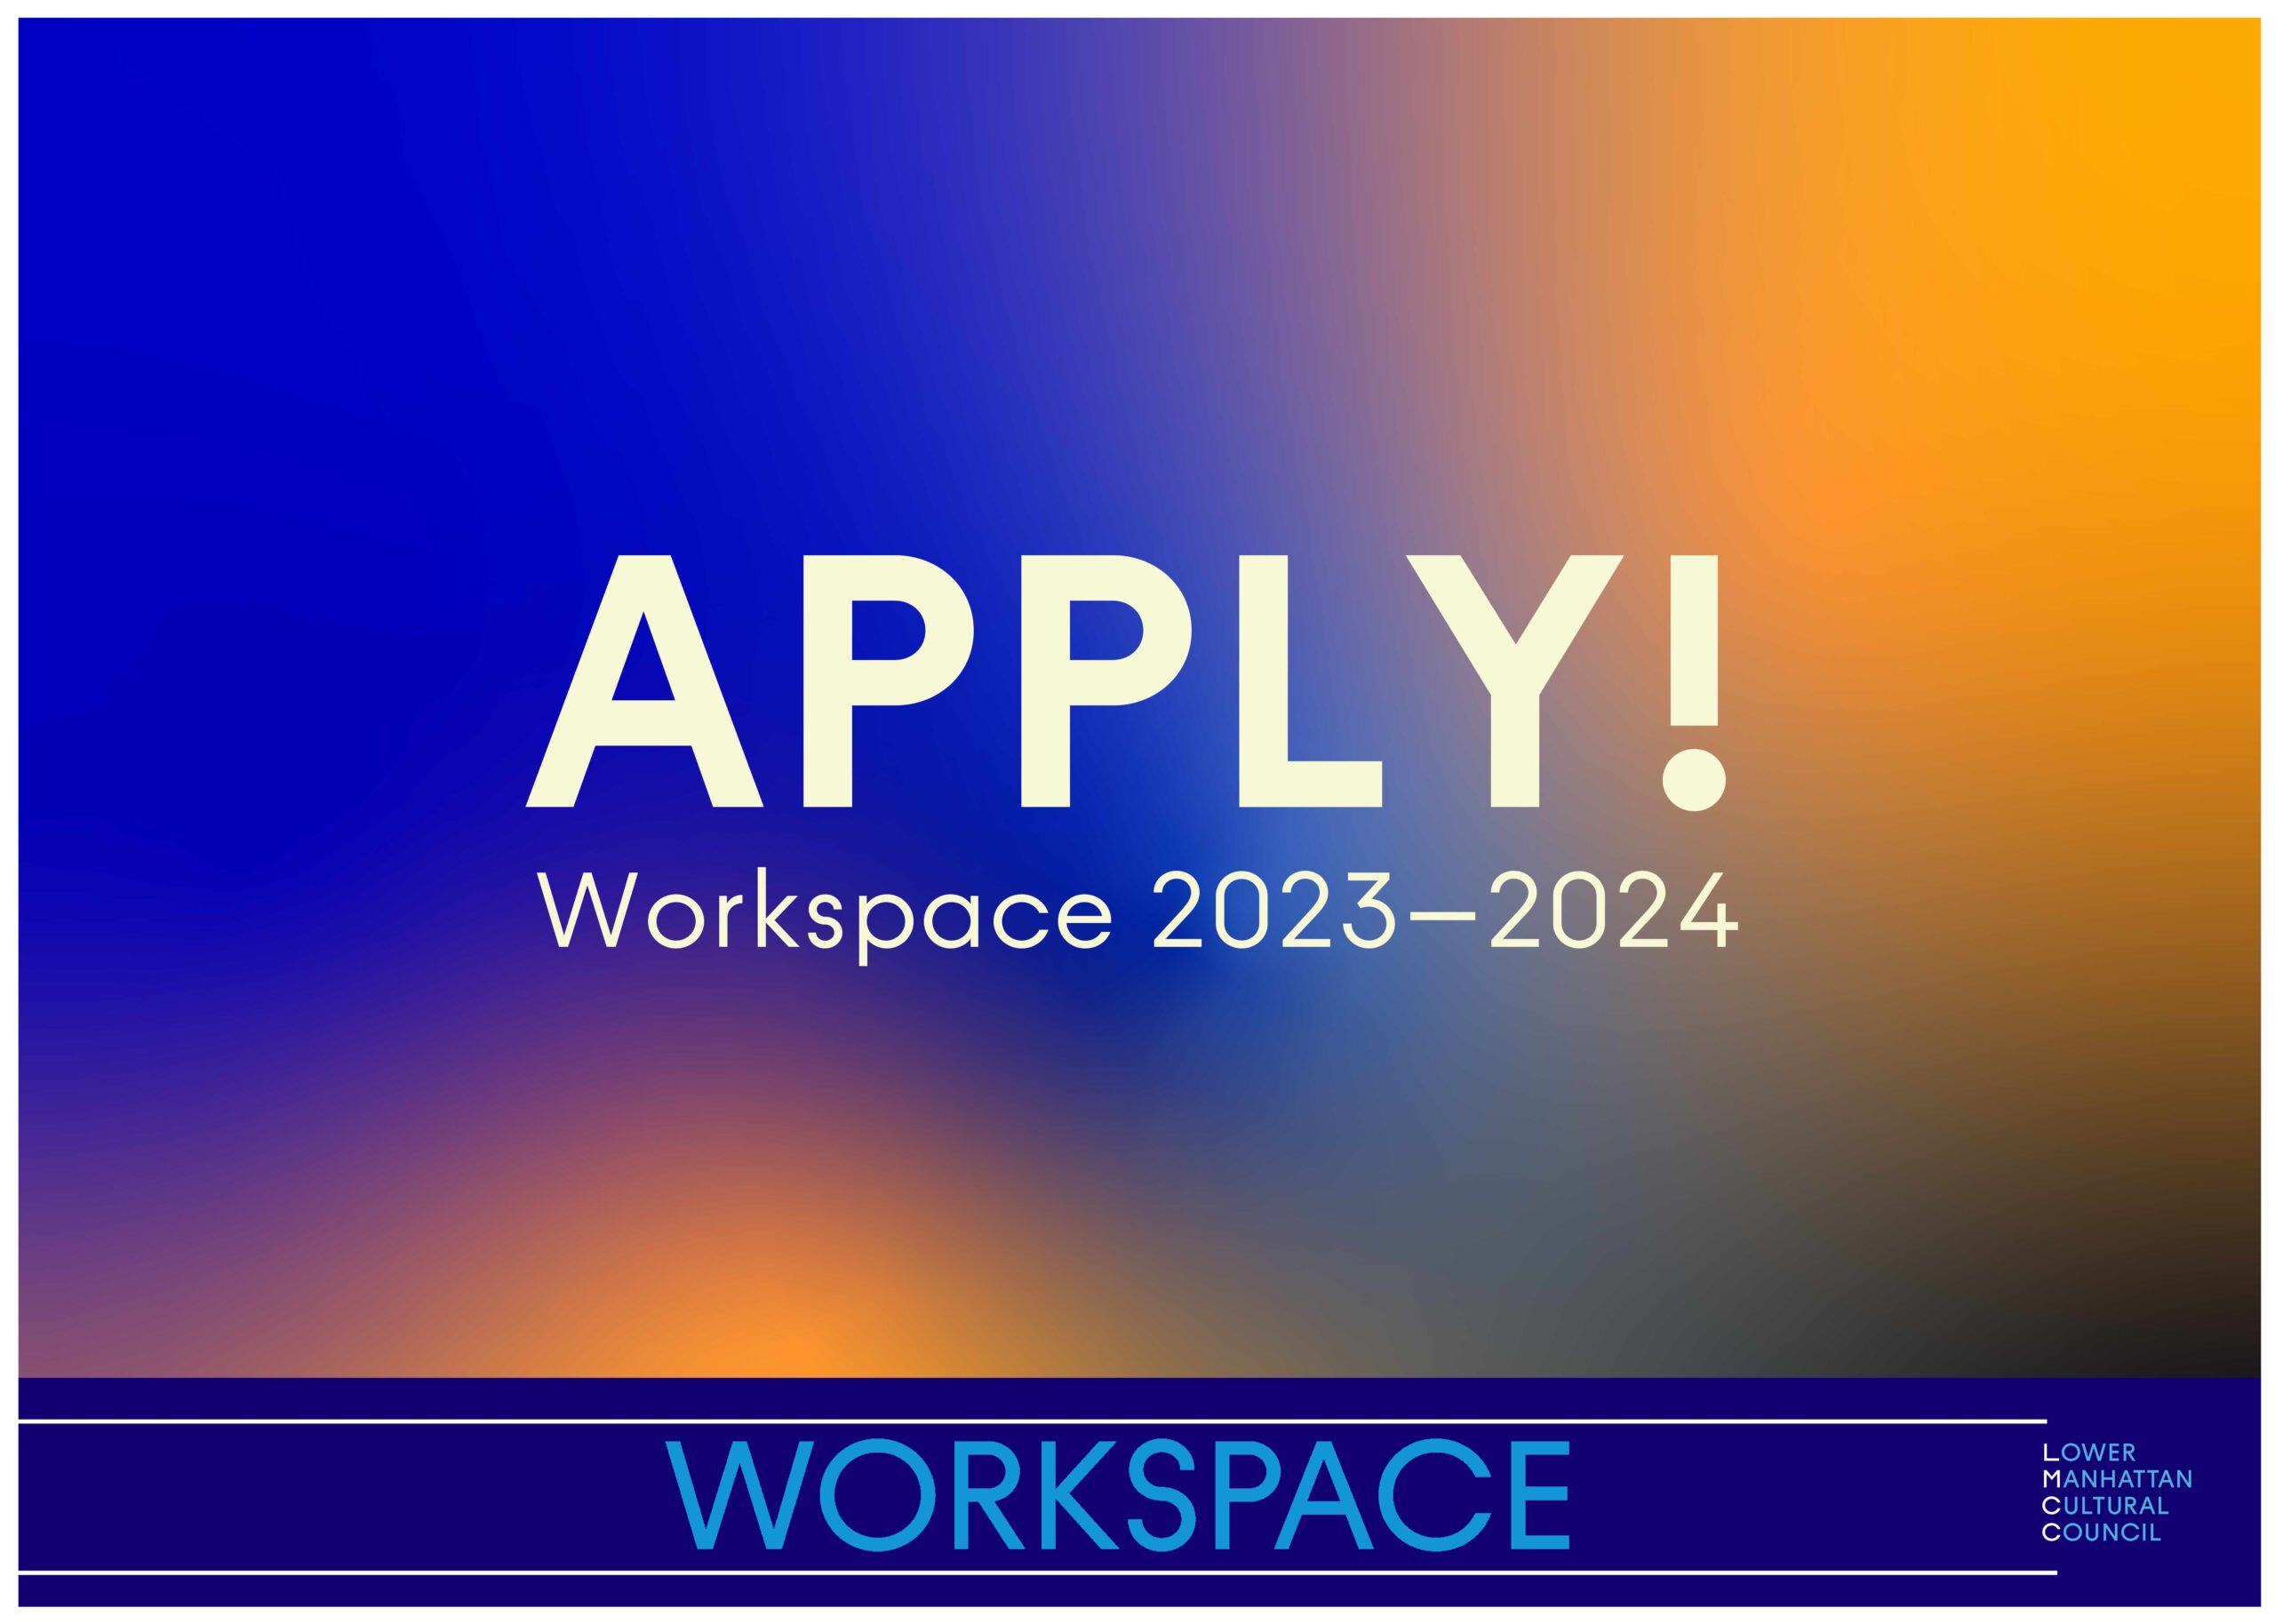 Workspace 2023-2024 Open Call